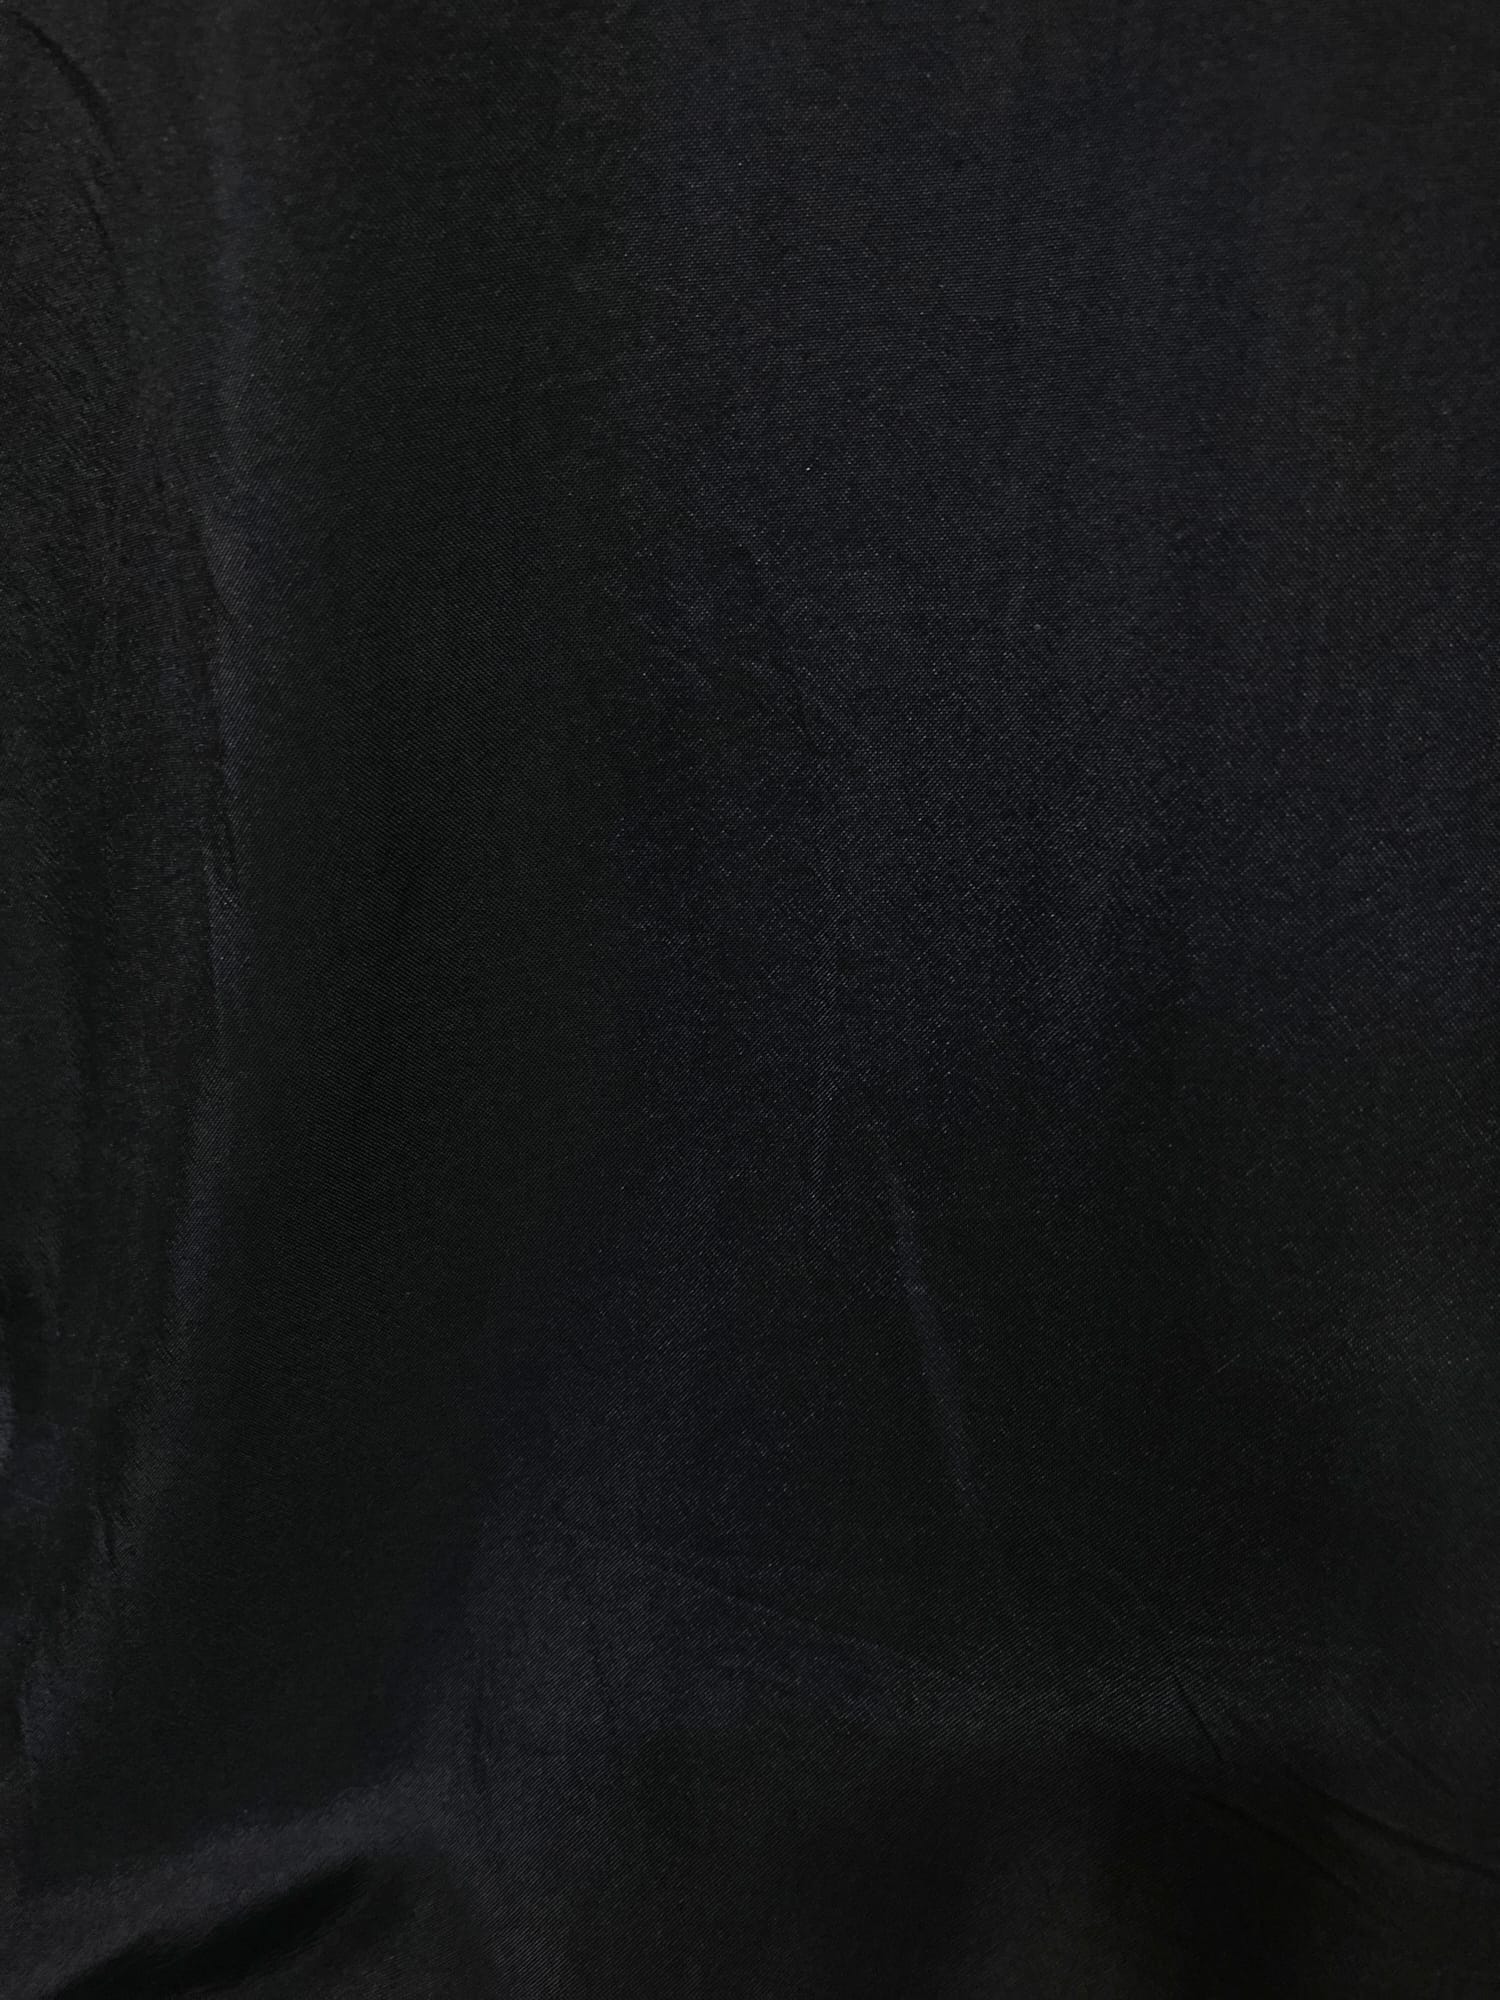 Tricot Comme des Garcons 1980s black satin double breasted blouse